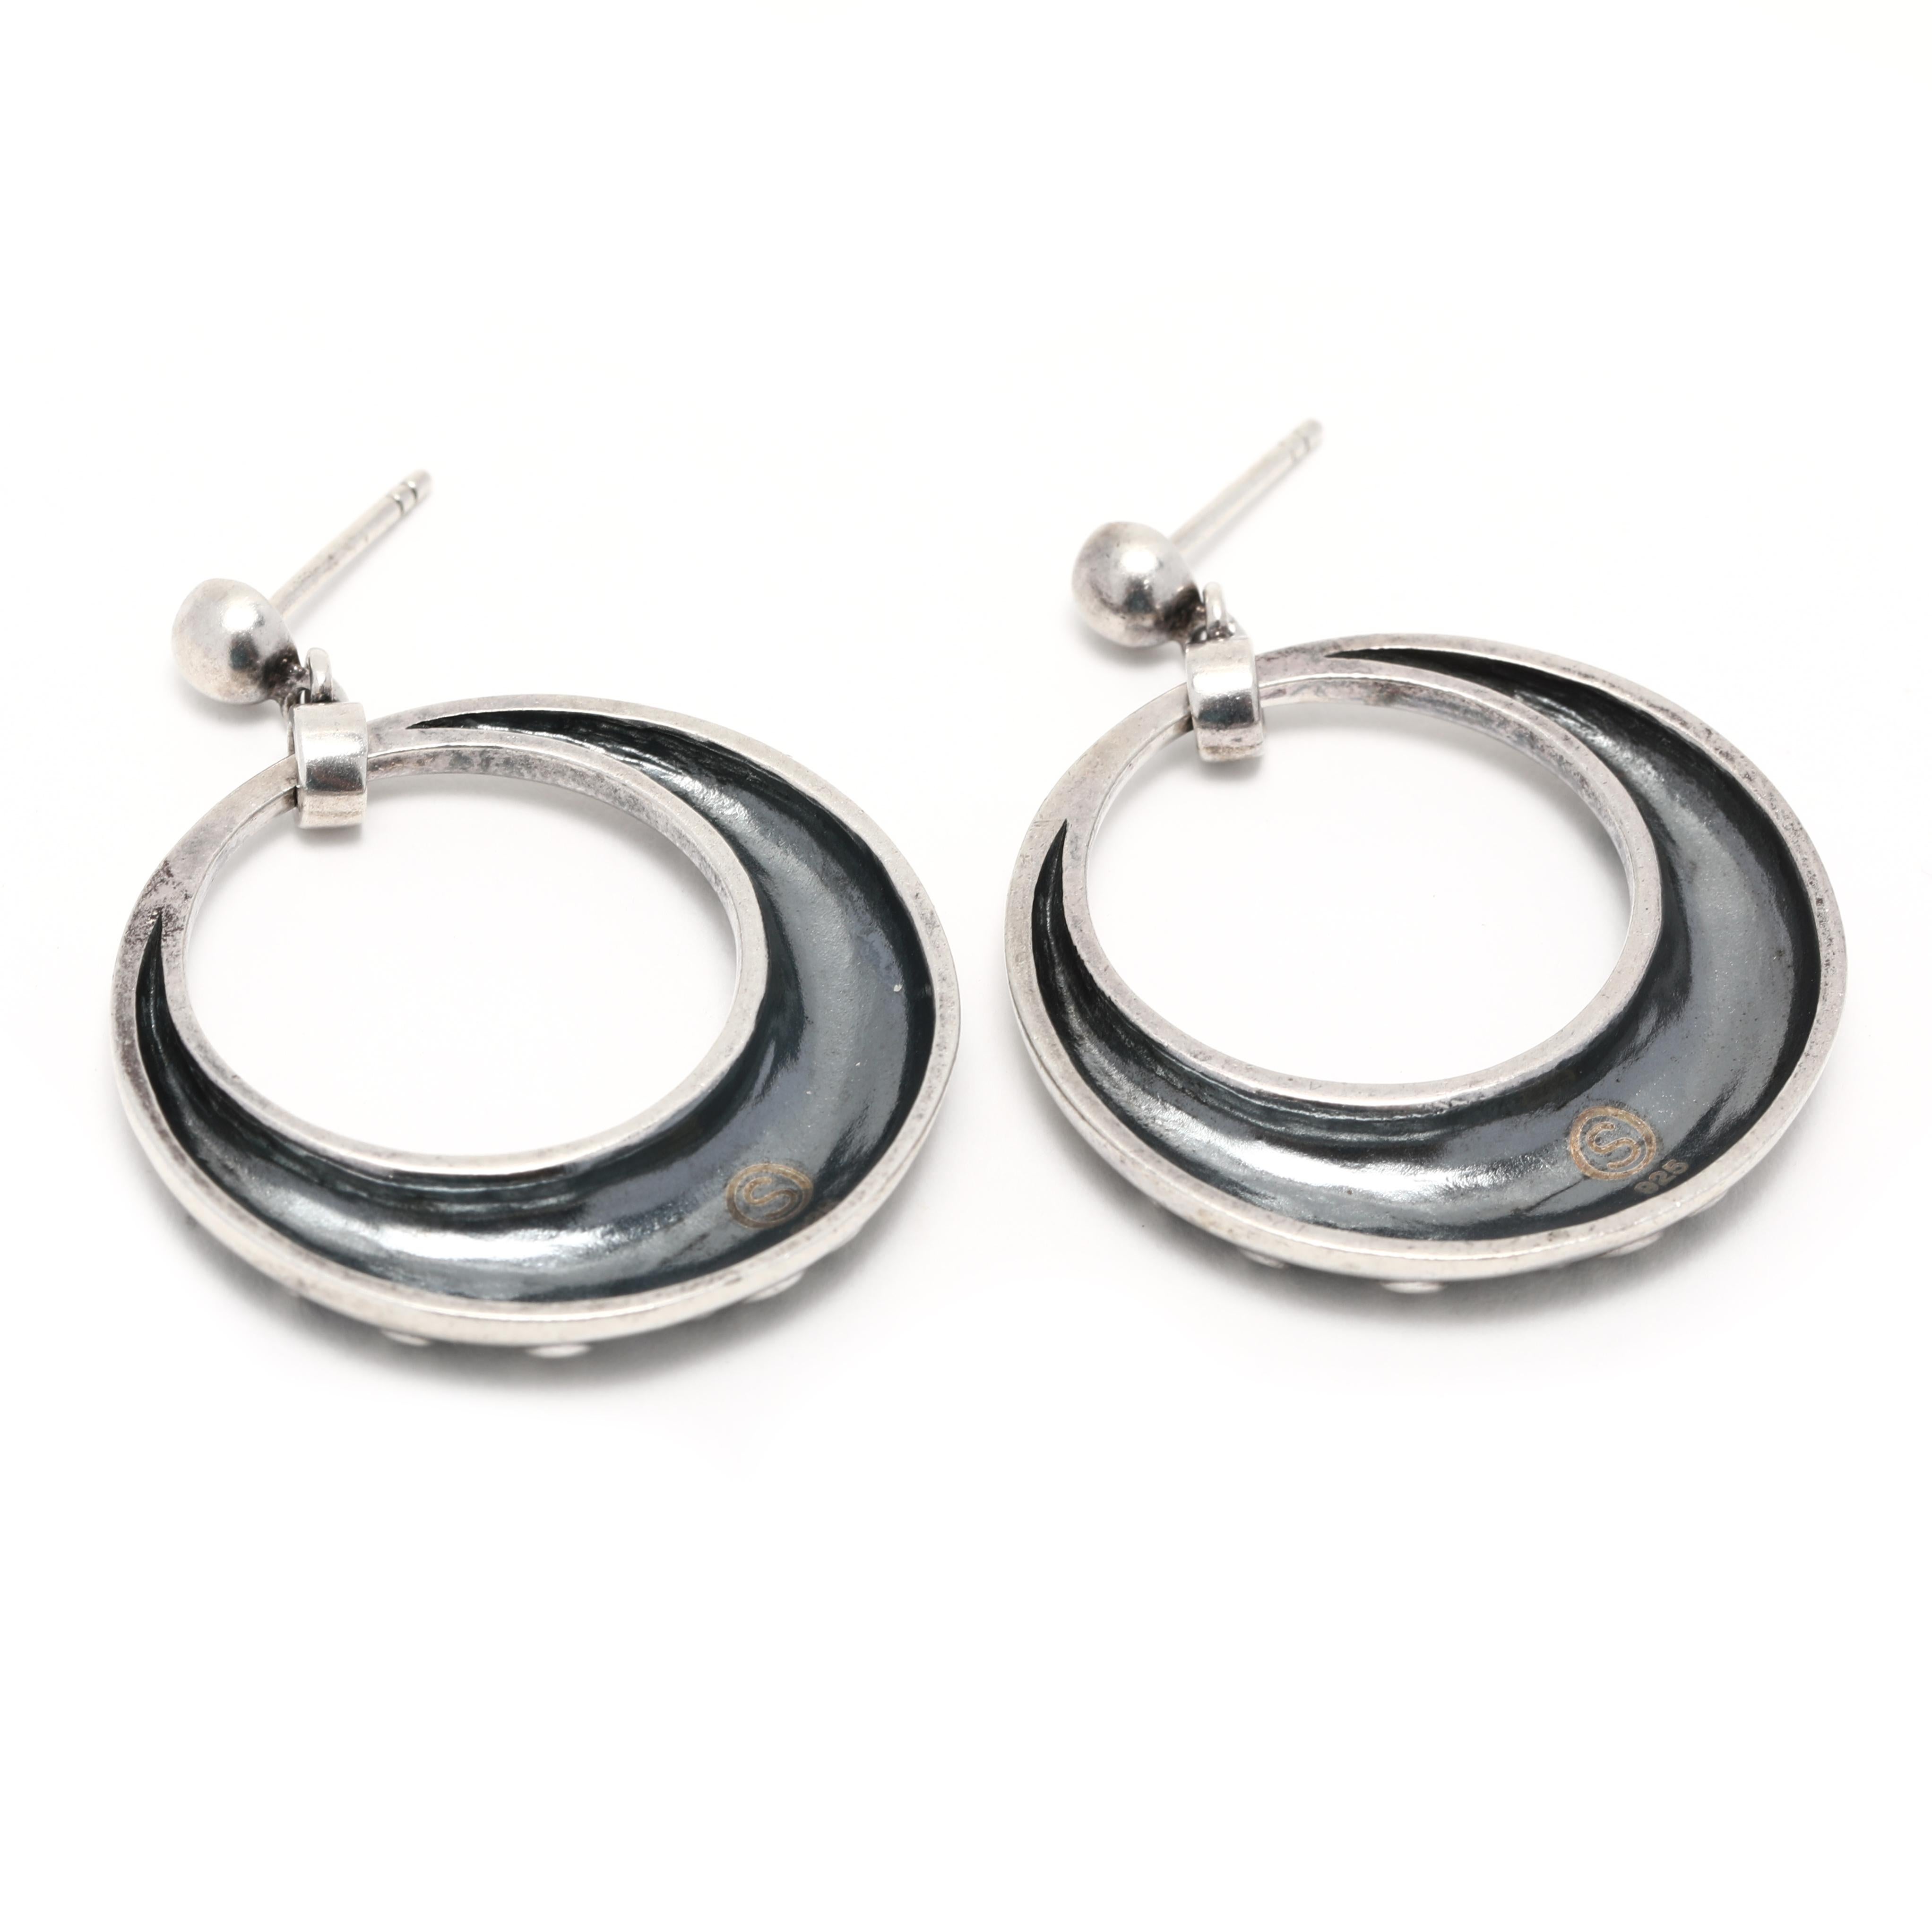 These stunning vintage open circle scroll detail dangle earrings are crafted from sterling silver and measure 1 3/8 inches in length. These unique silver earrings feature a delicate open circle detail that is perfect for any occasion. Their dangle